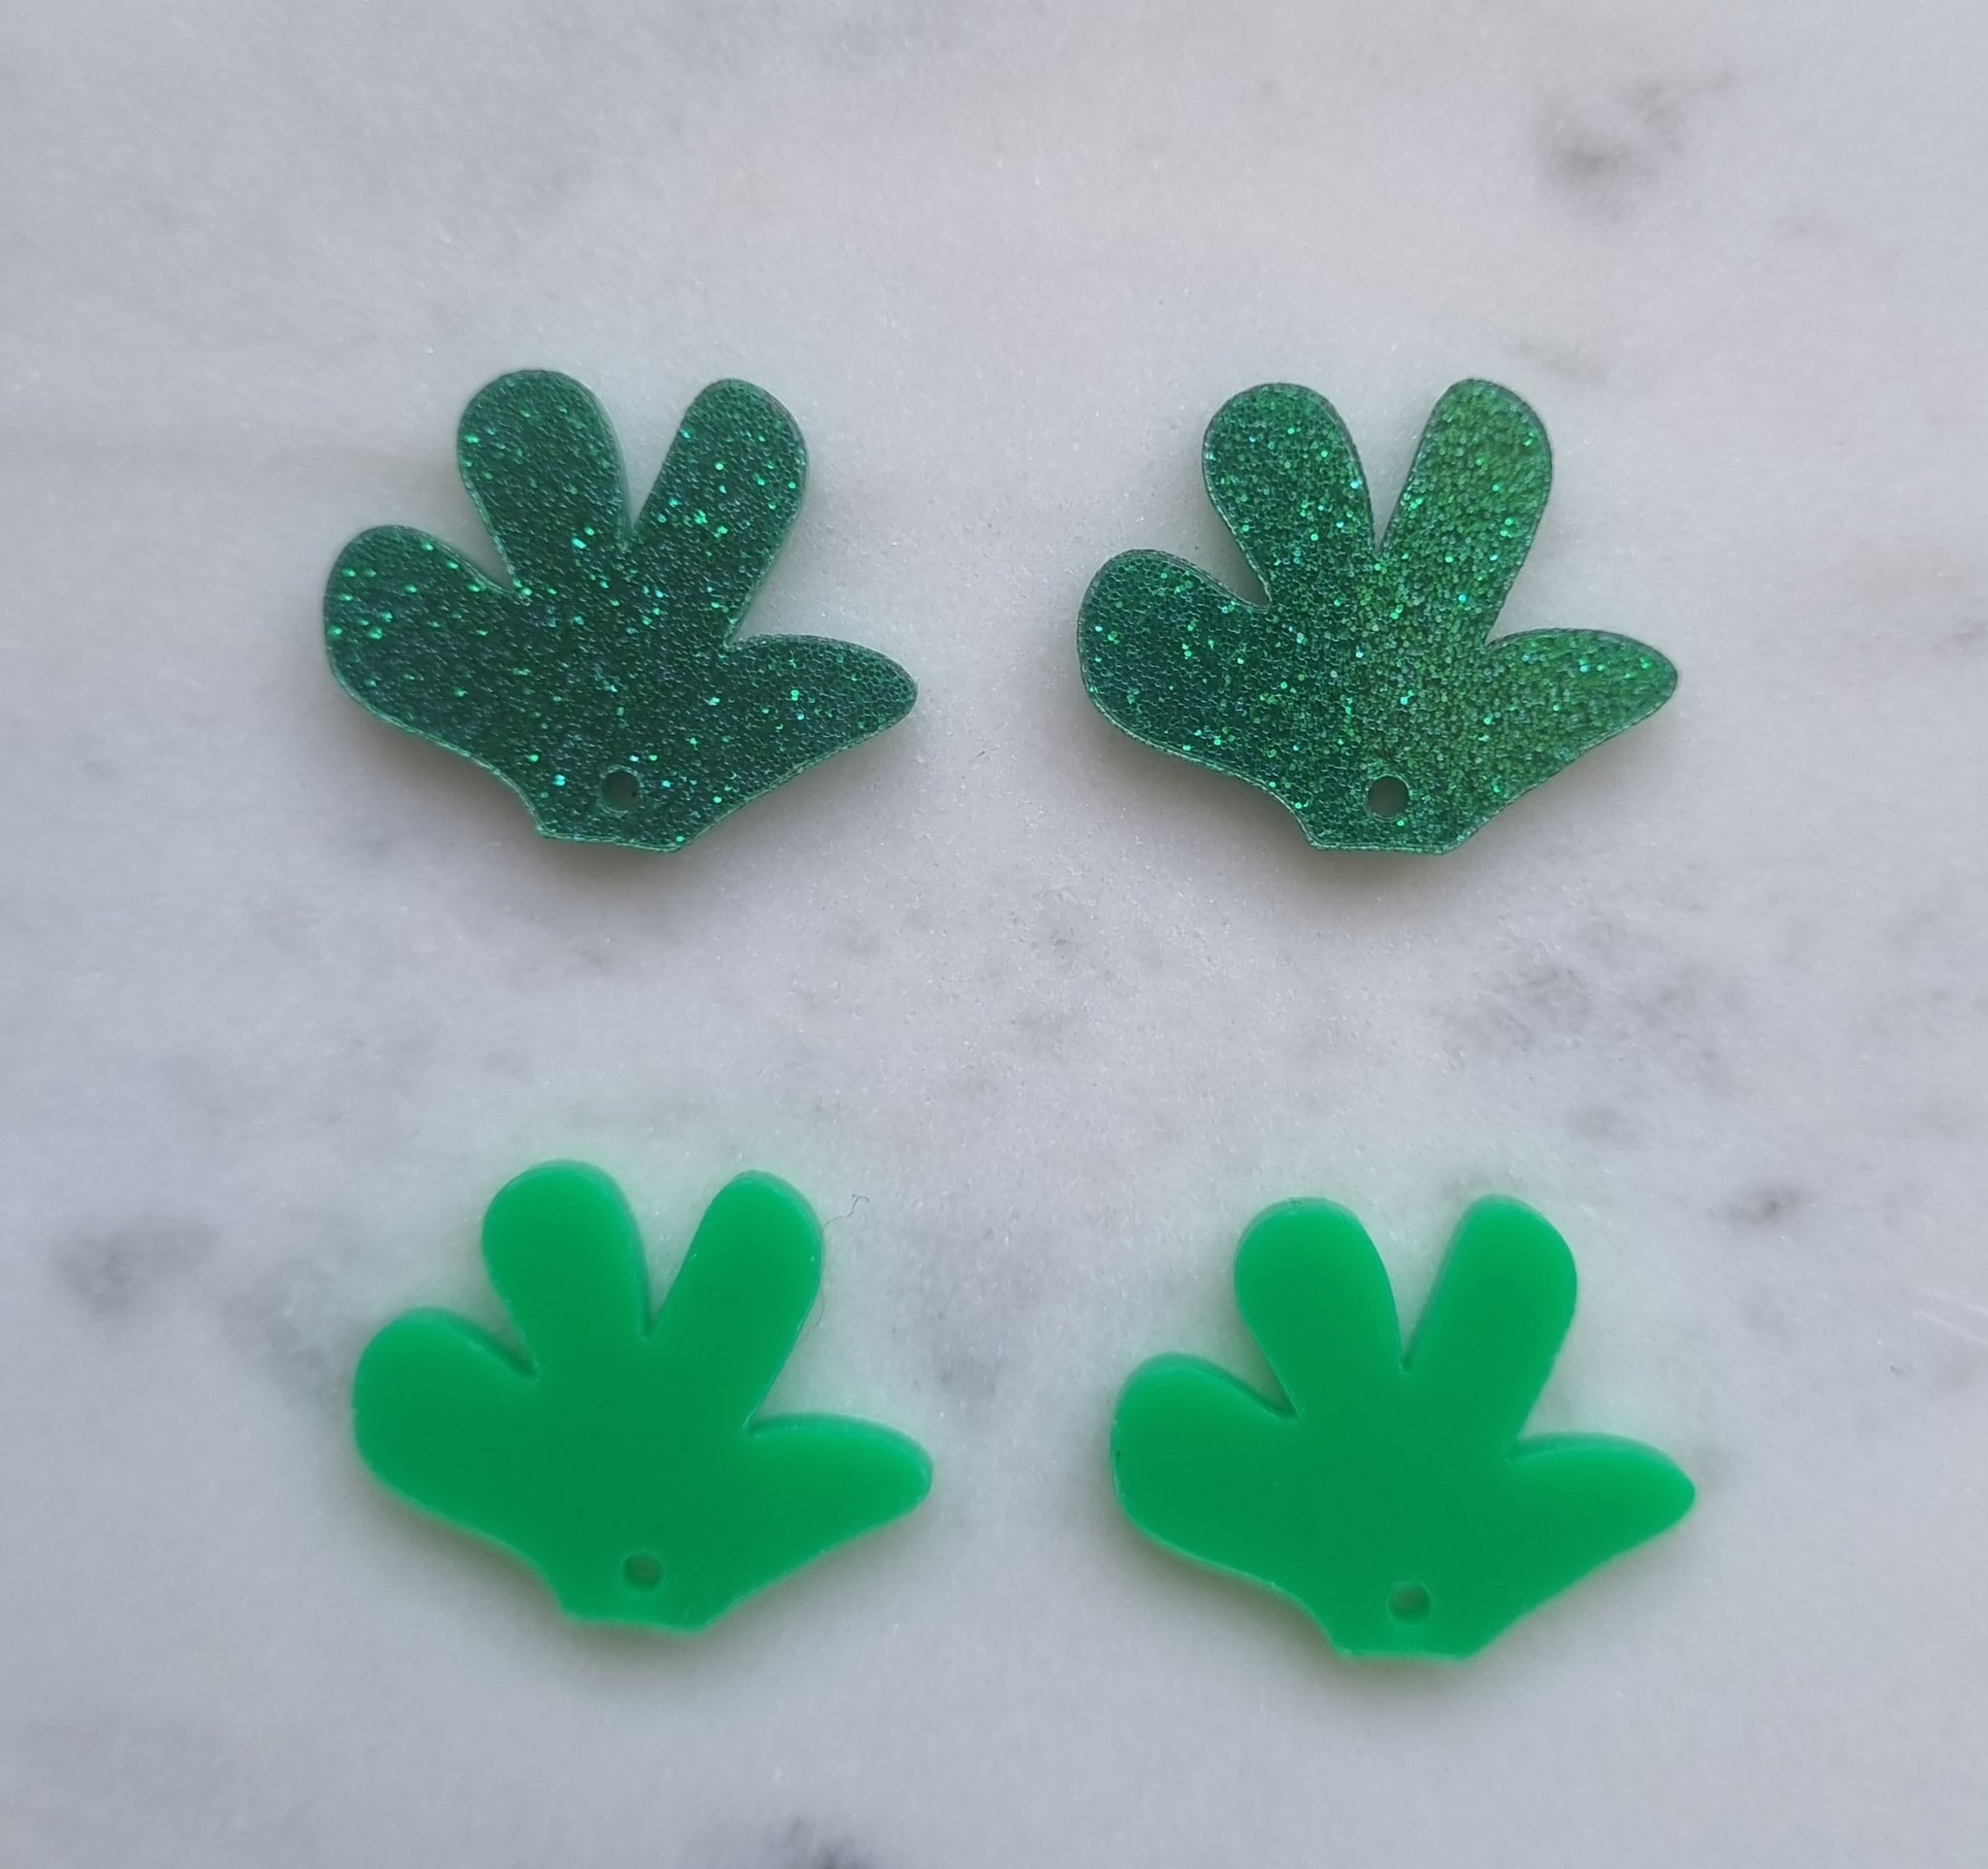 10pcs (5pr) Laser Cut Acrylic Carrot/Leaf Easter Collection